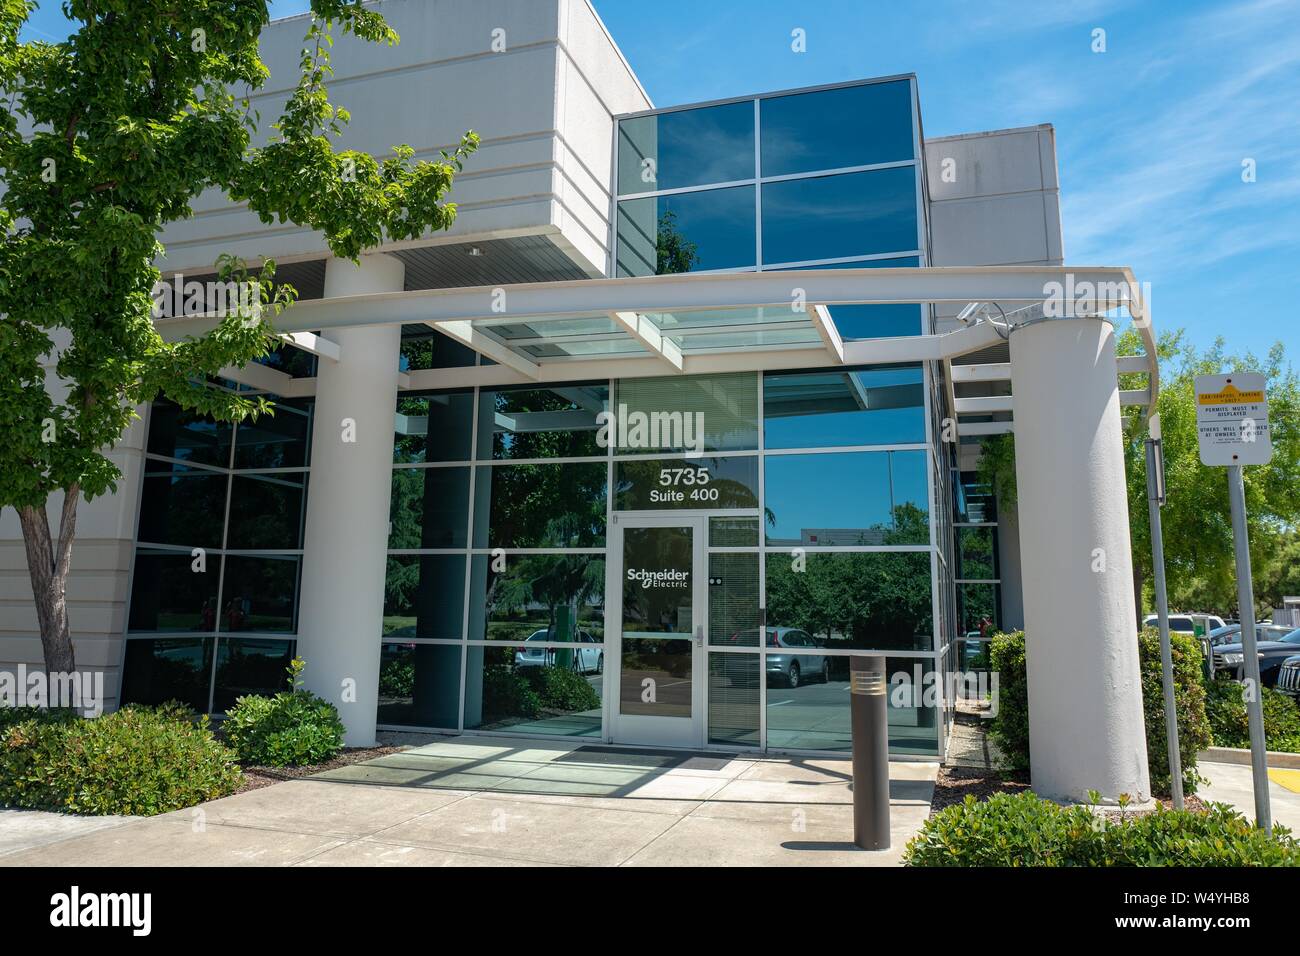 Facade with sign and logo at office of electrical automation company Schneider Electric in Pleasanton, California, July 2, 2019. () Stock Photo